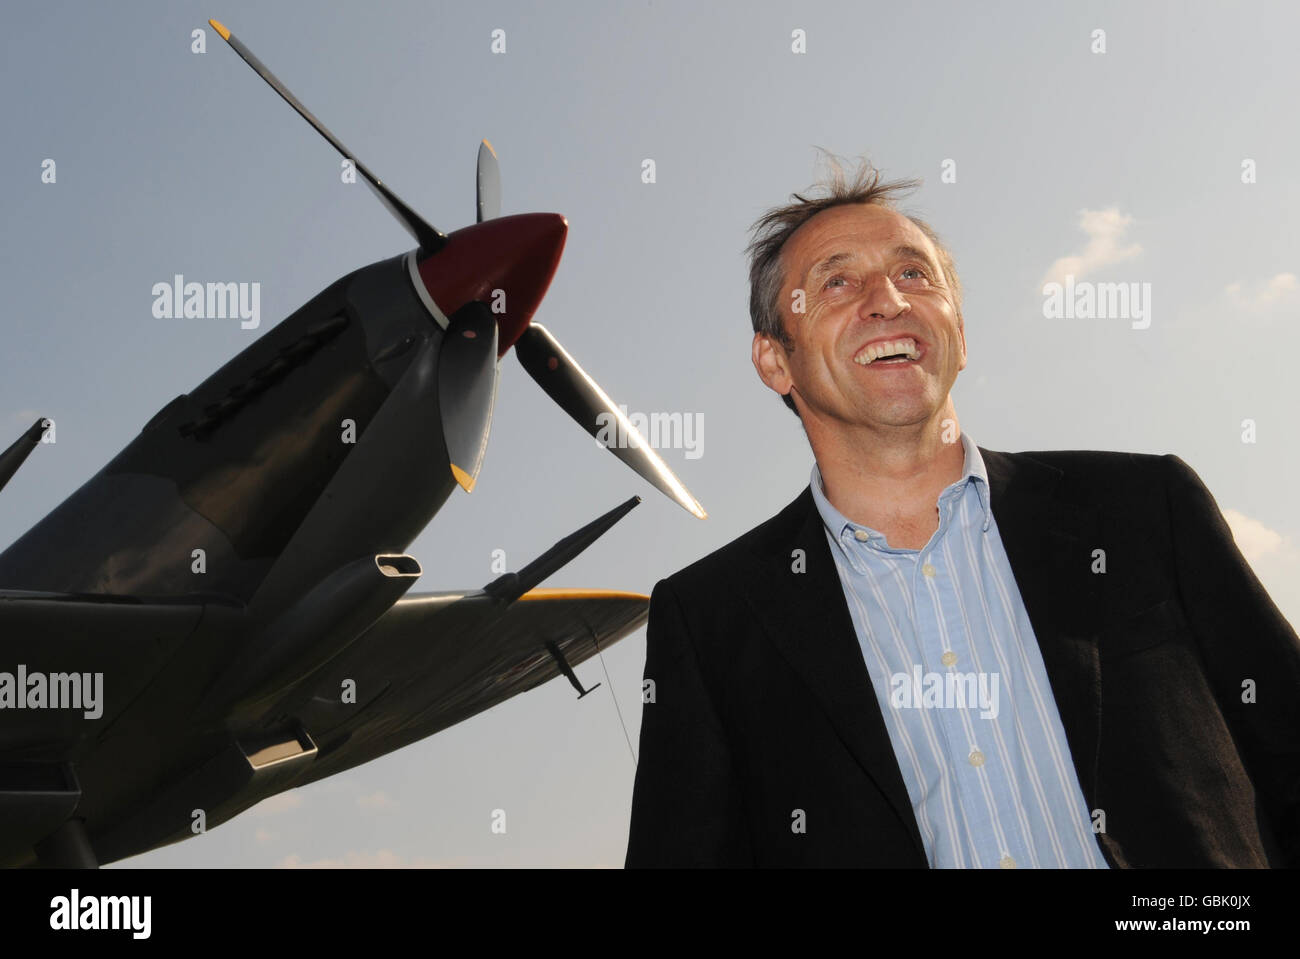 Spitfire for sale. Steve Brooks stands next to a Spitfire similar to the one that he has just bought at auction for 1.78 million. Stock Photo